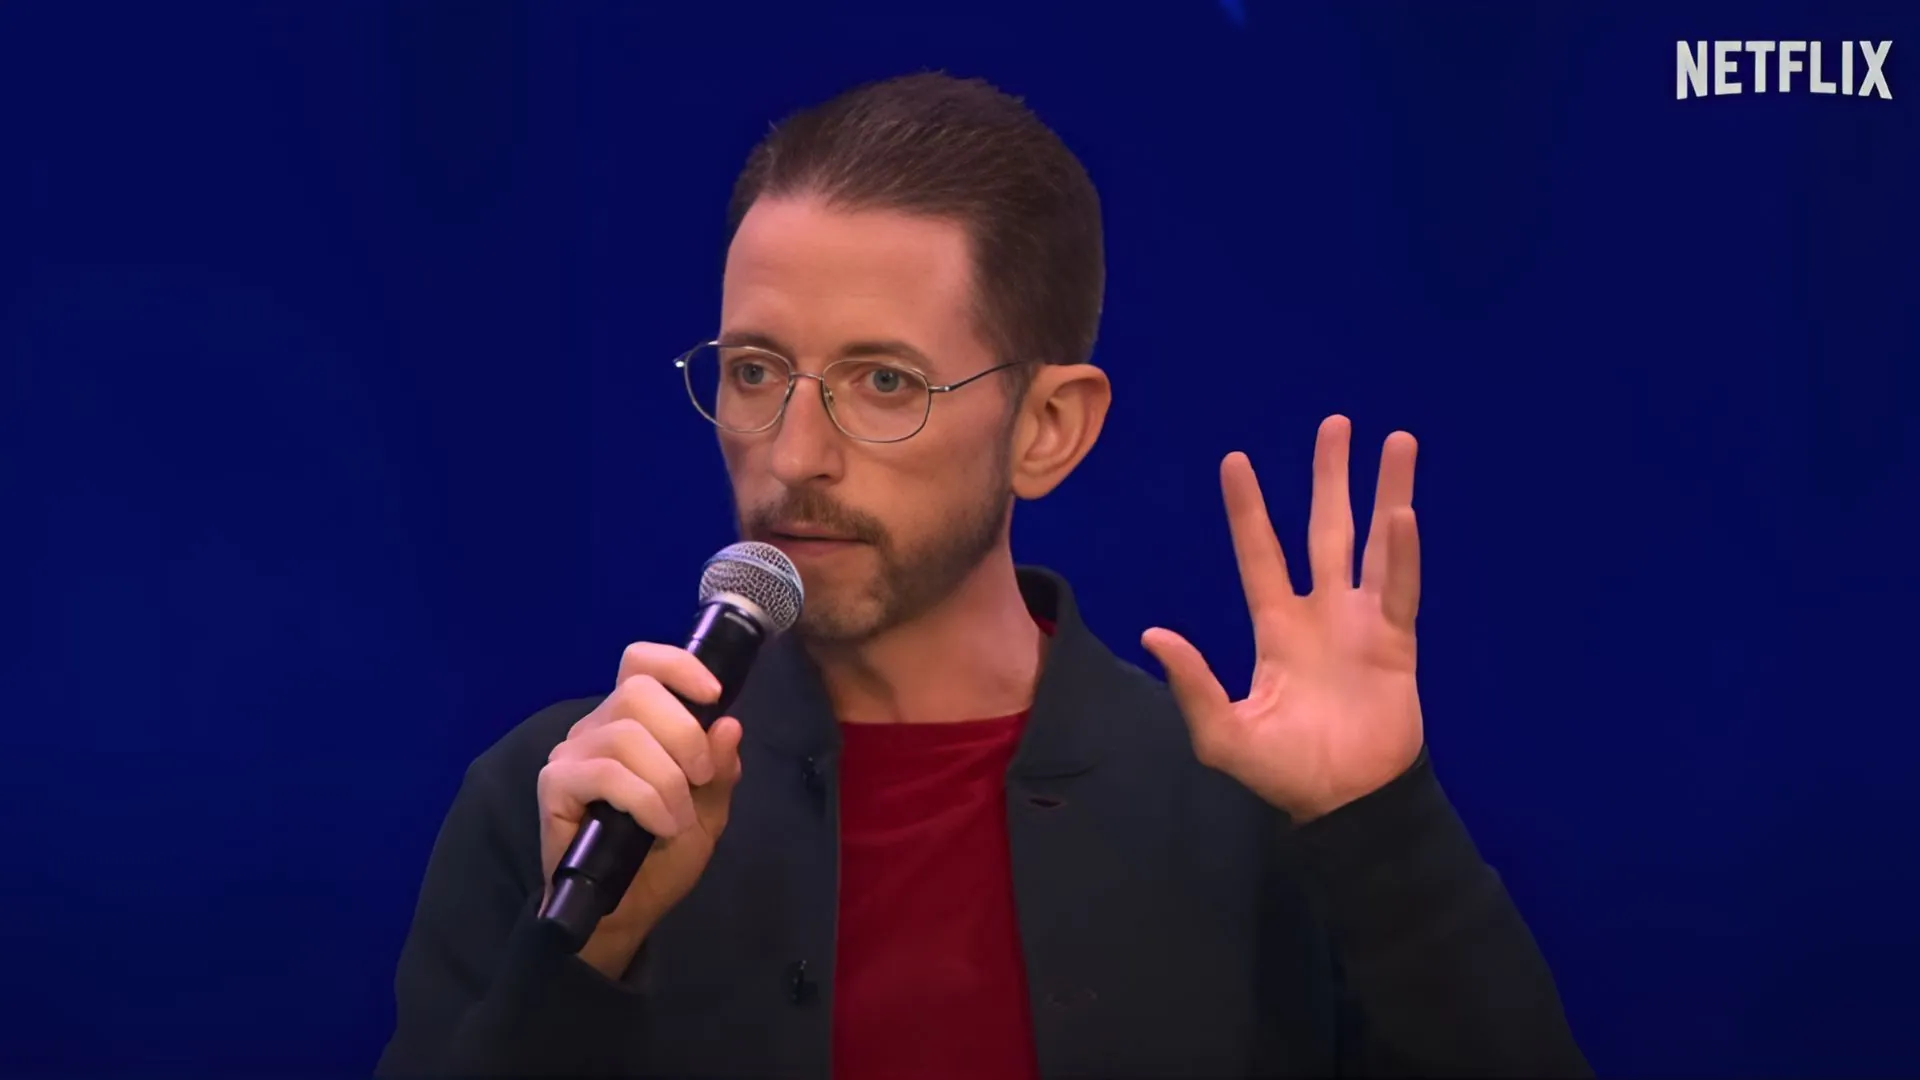 Neal Brennan Gets "Crazy Good" in New Netflix Stand-Up